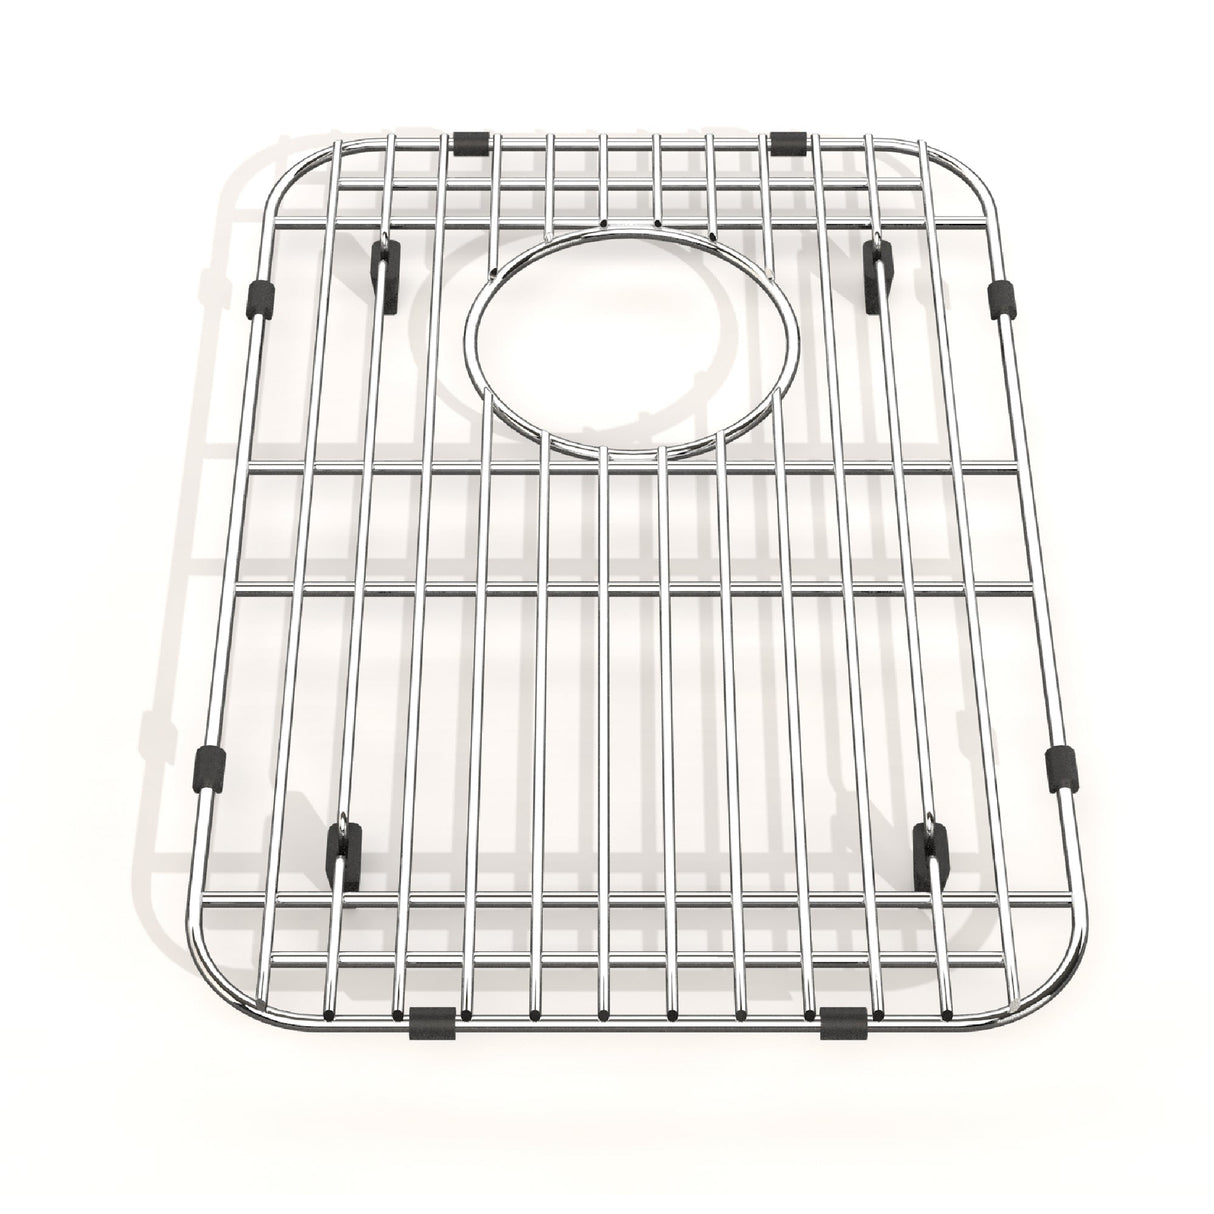 KINDRED BGA1217S Stainless Steel Bottom Grid for Sink 15-in x 10.13-in In Stainless Steel